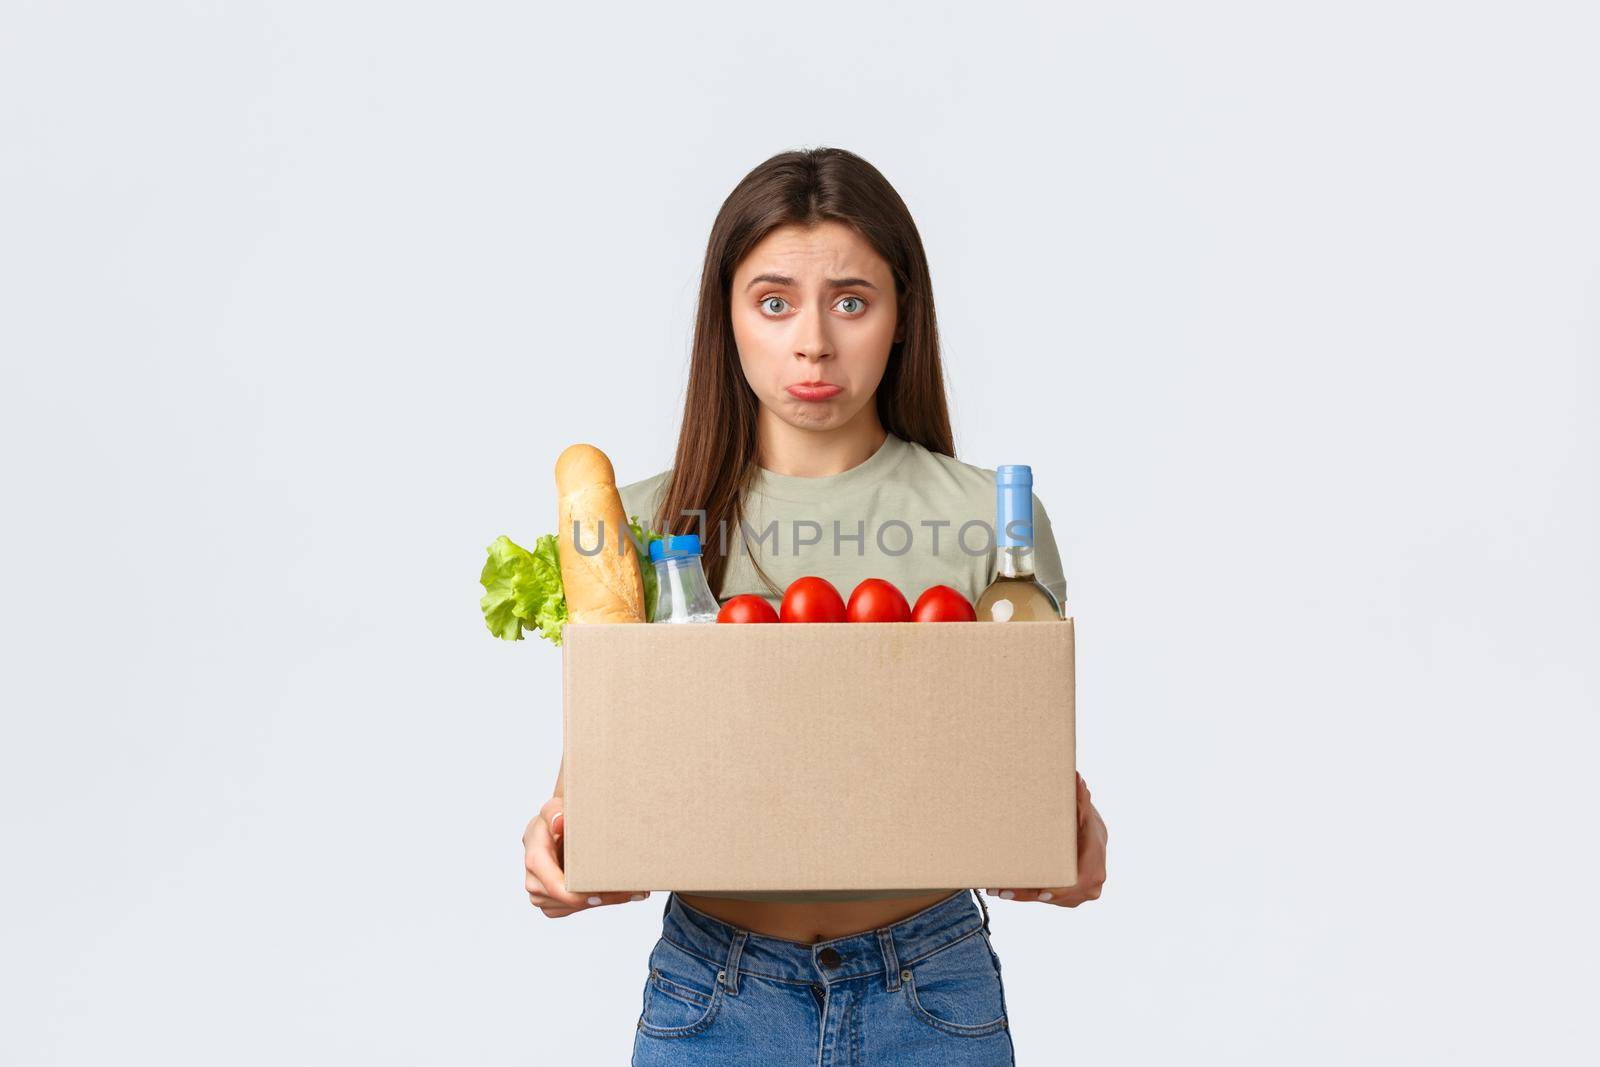 Online home delivery, internet orders and grocery shopping concept. Disappointed female customer receive wrong order of groceries, looking upset inside box and pouting, stand white background.